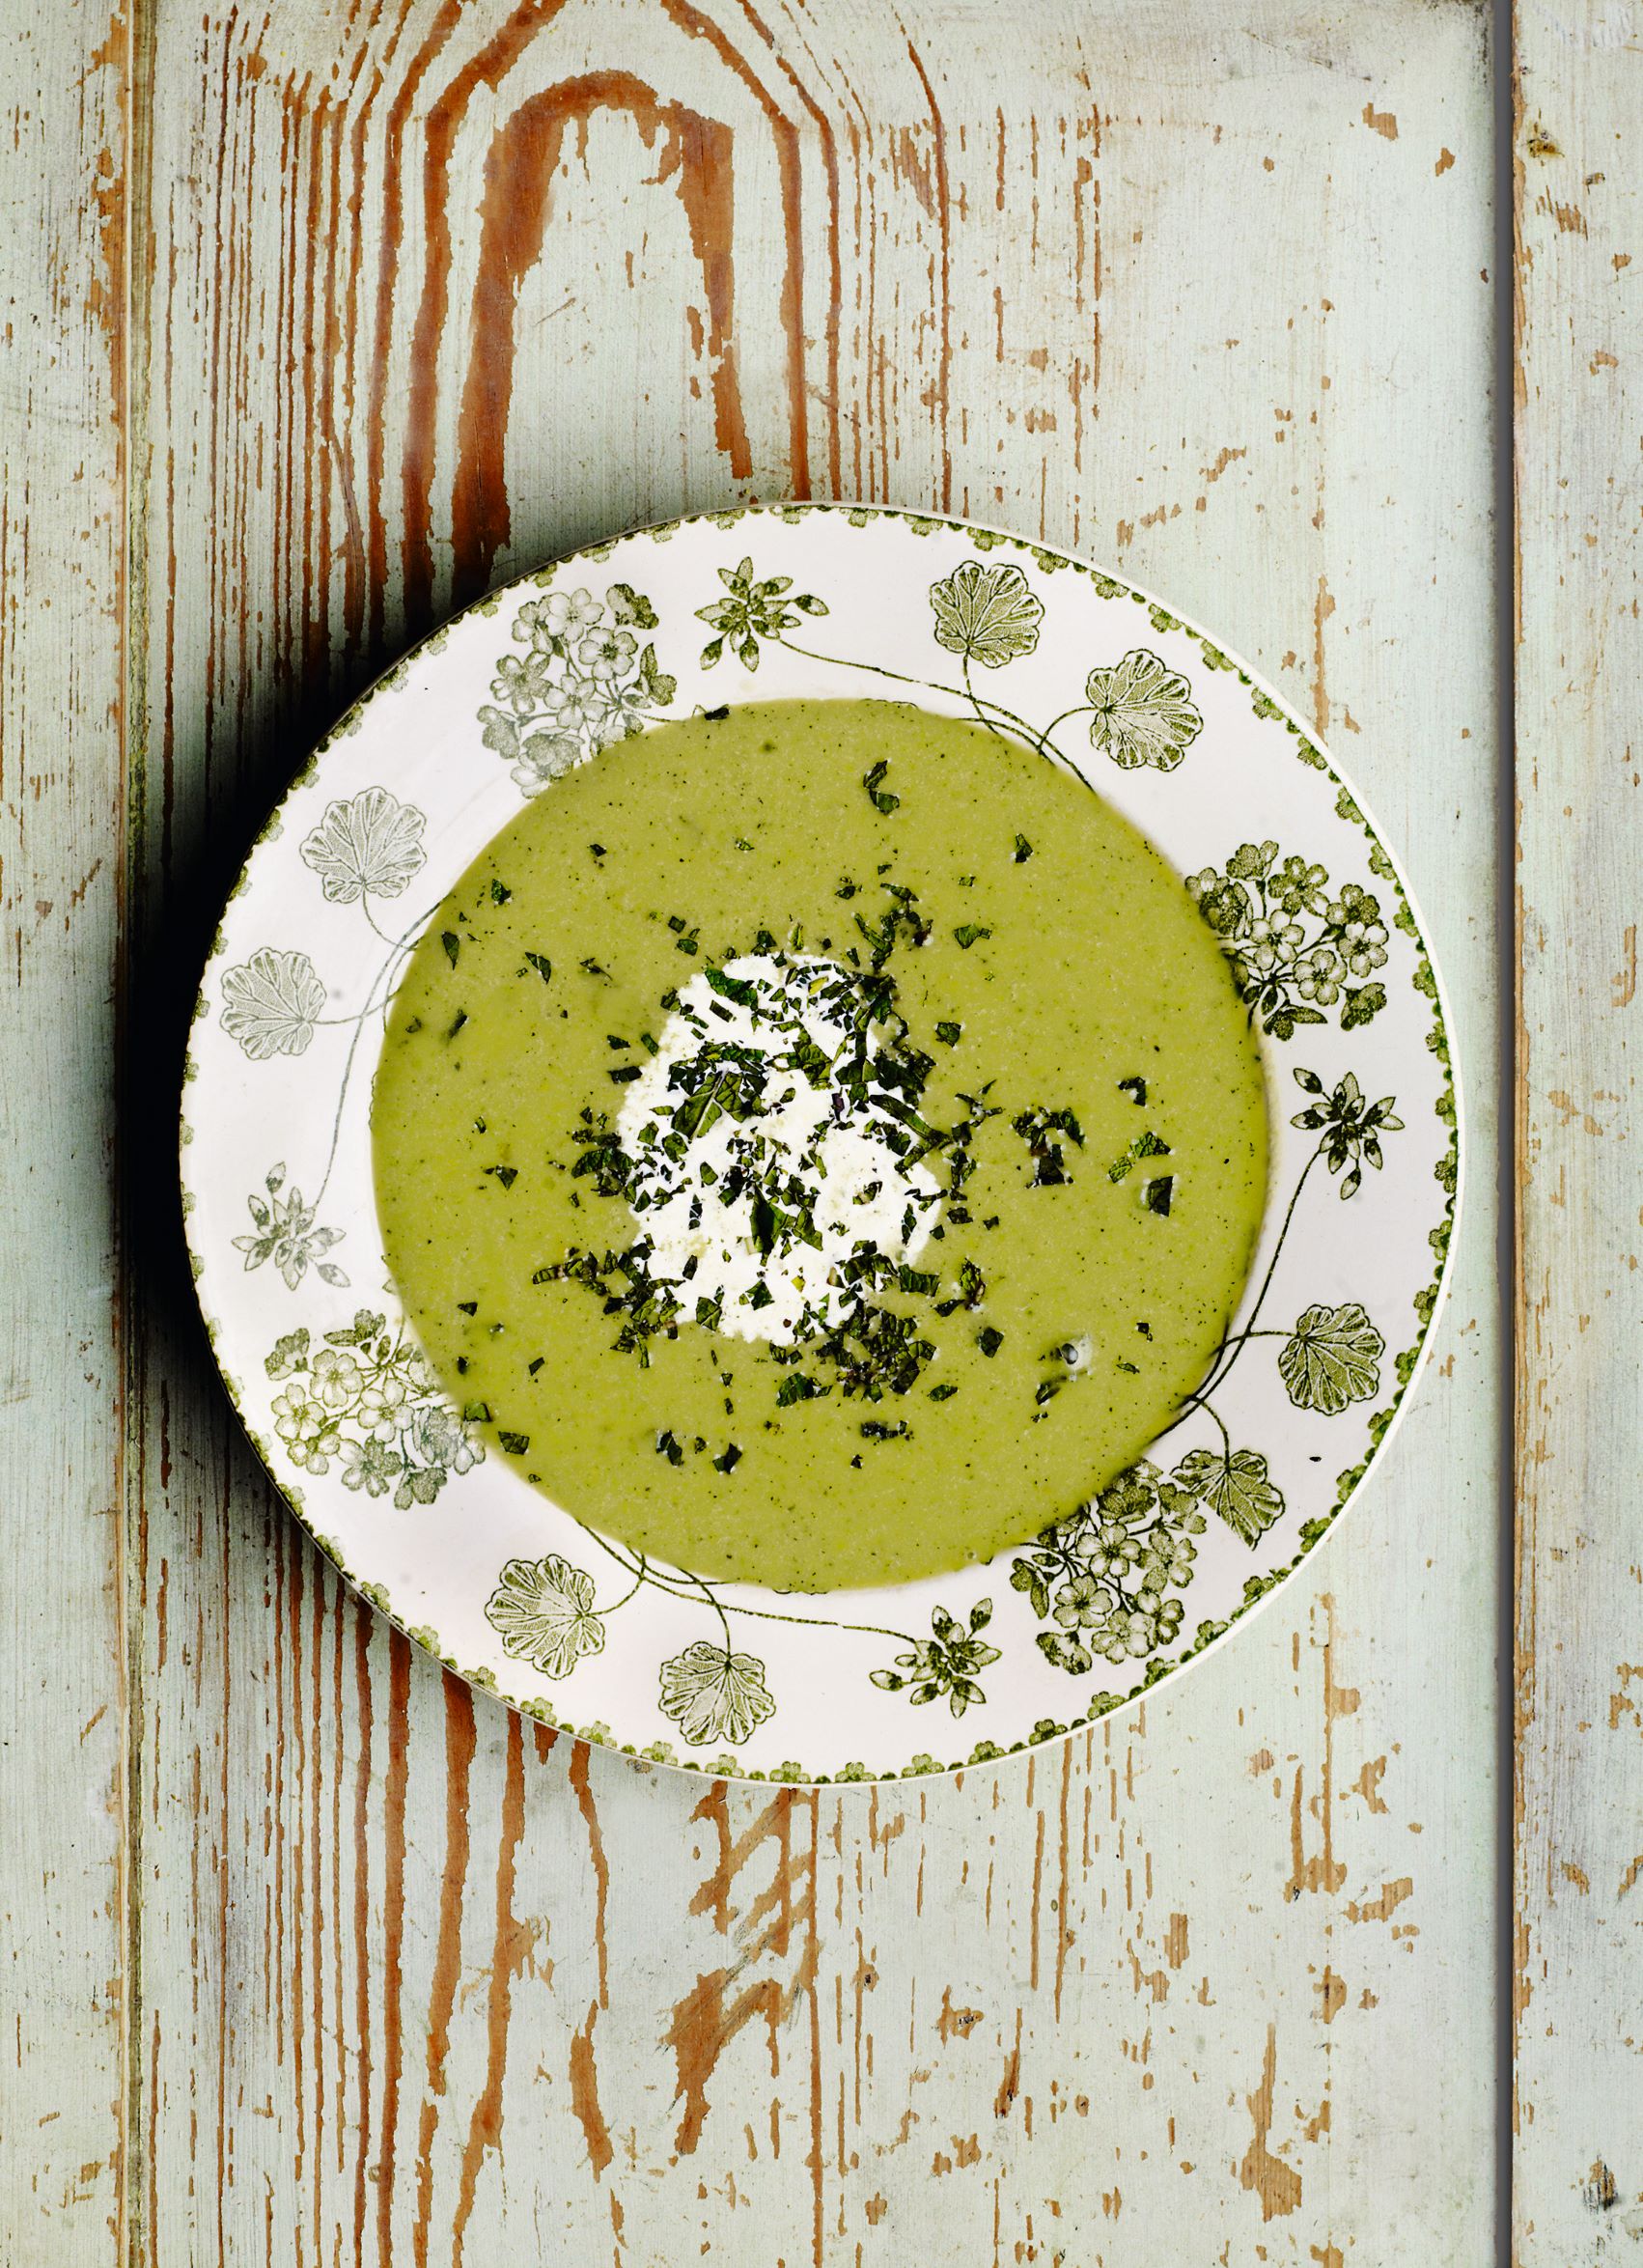 Pea and mint soup, from The Great Dixter Cookbook